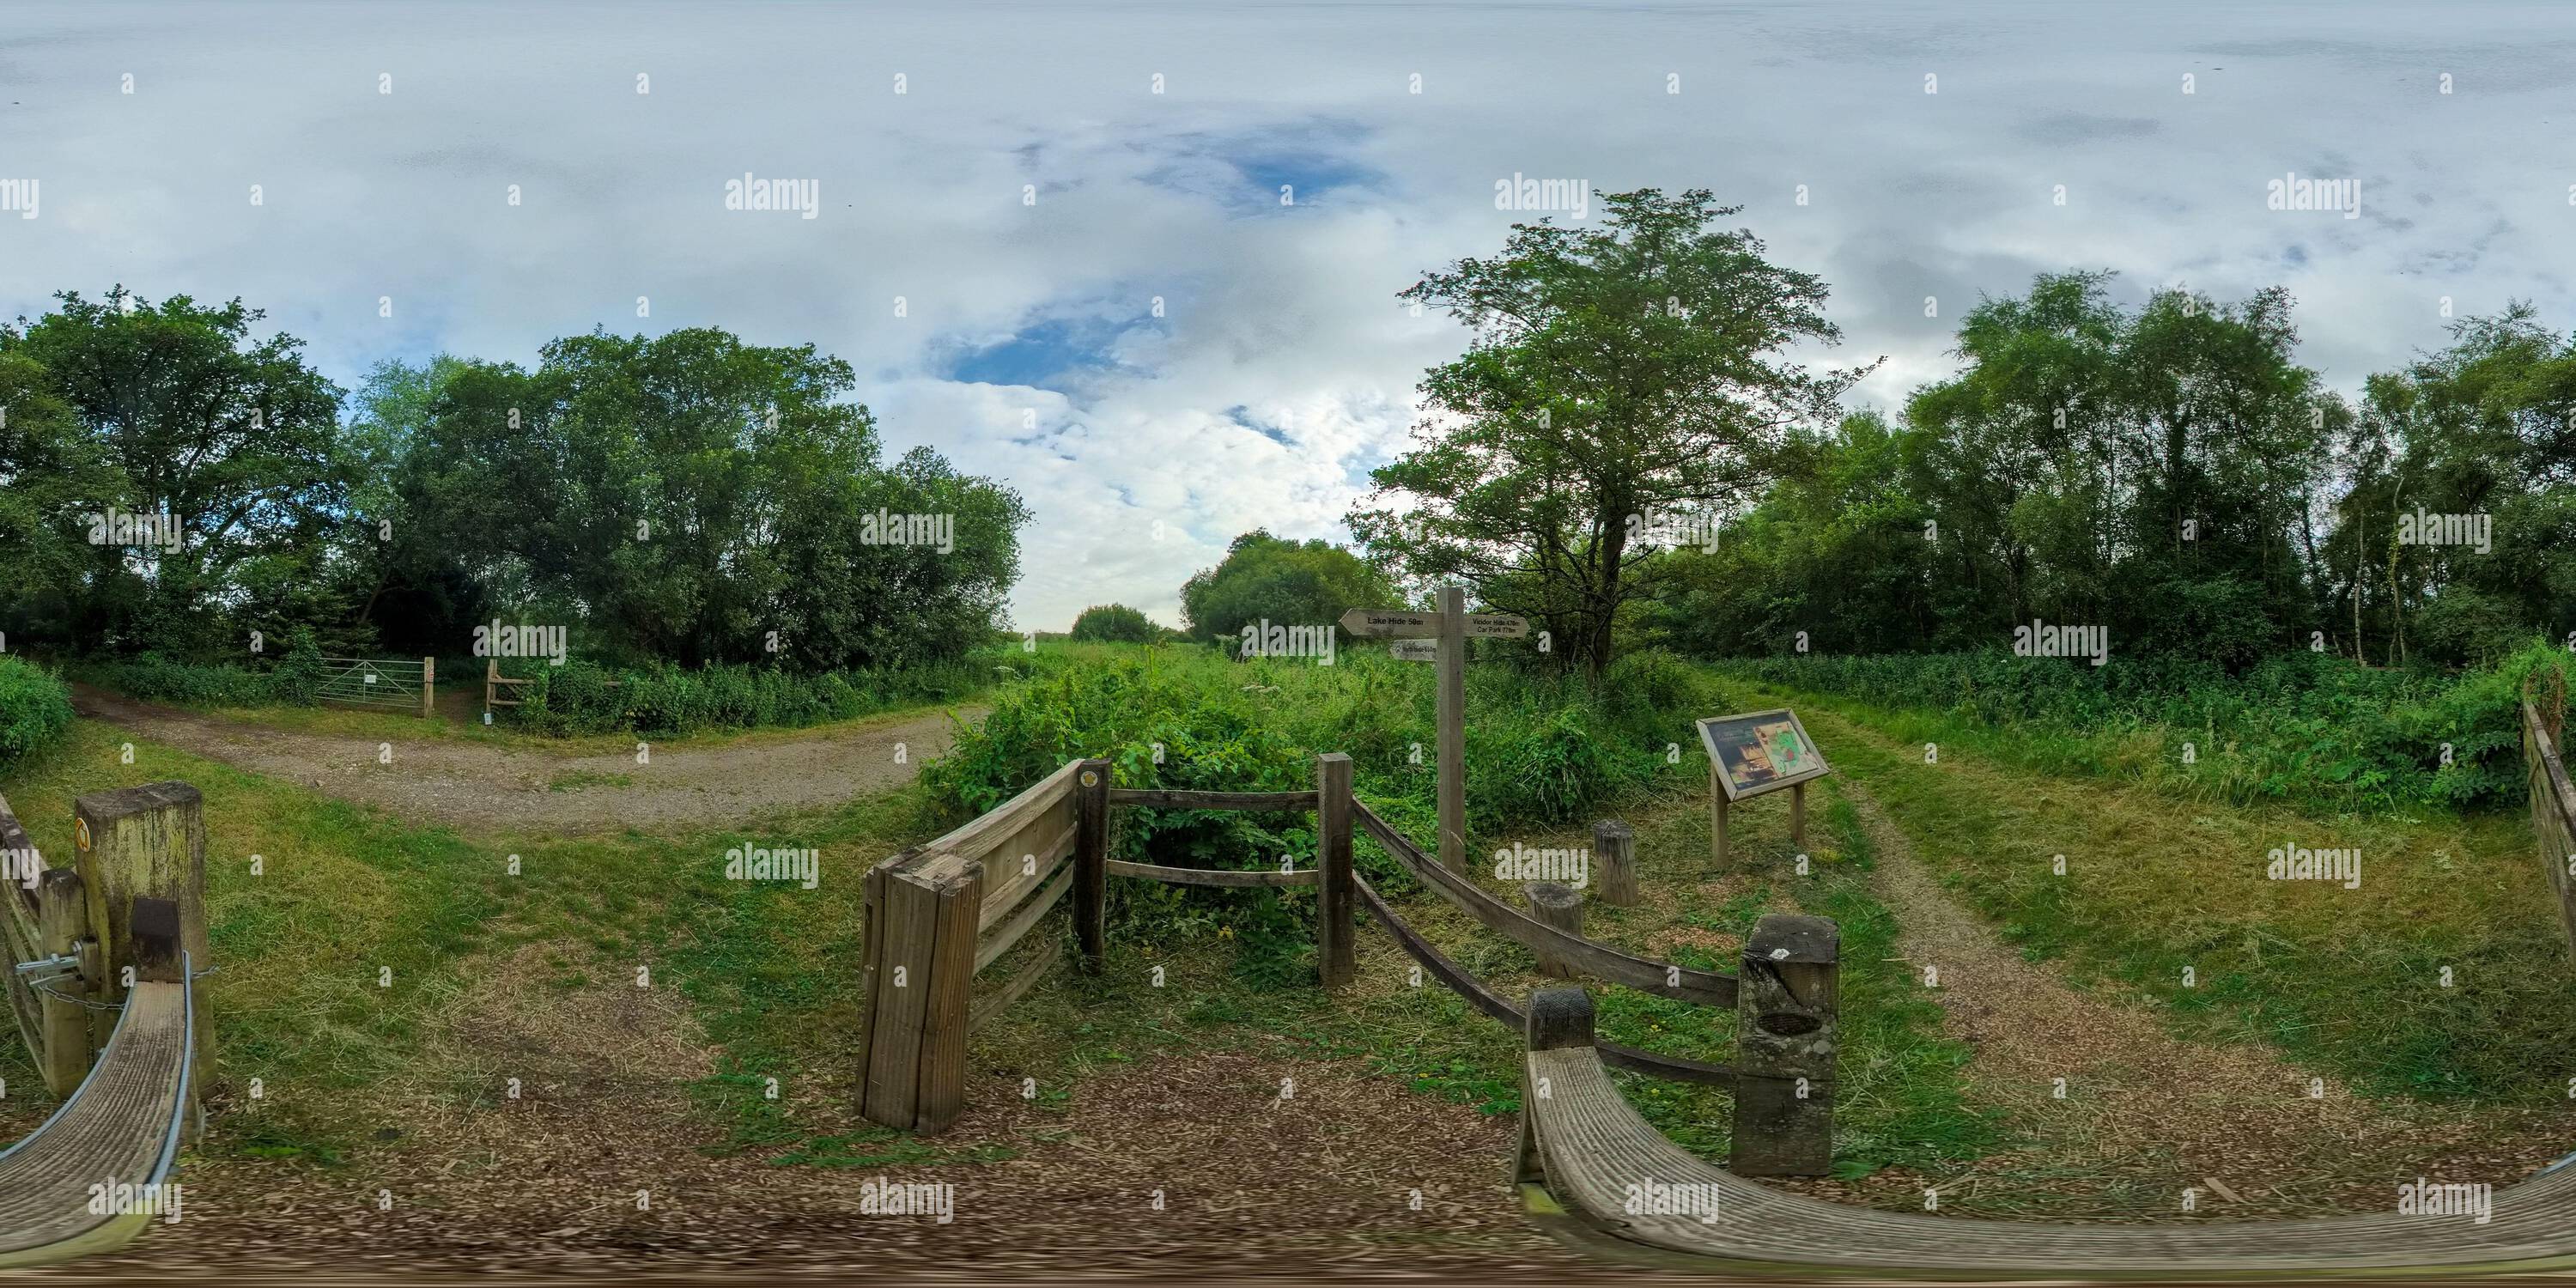 360 degree panoramic view of By Wooden Gate on London Drove in Westhay Moor National Nature Reserve